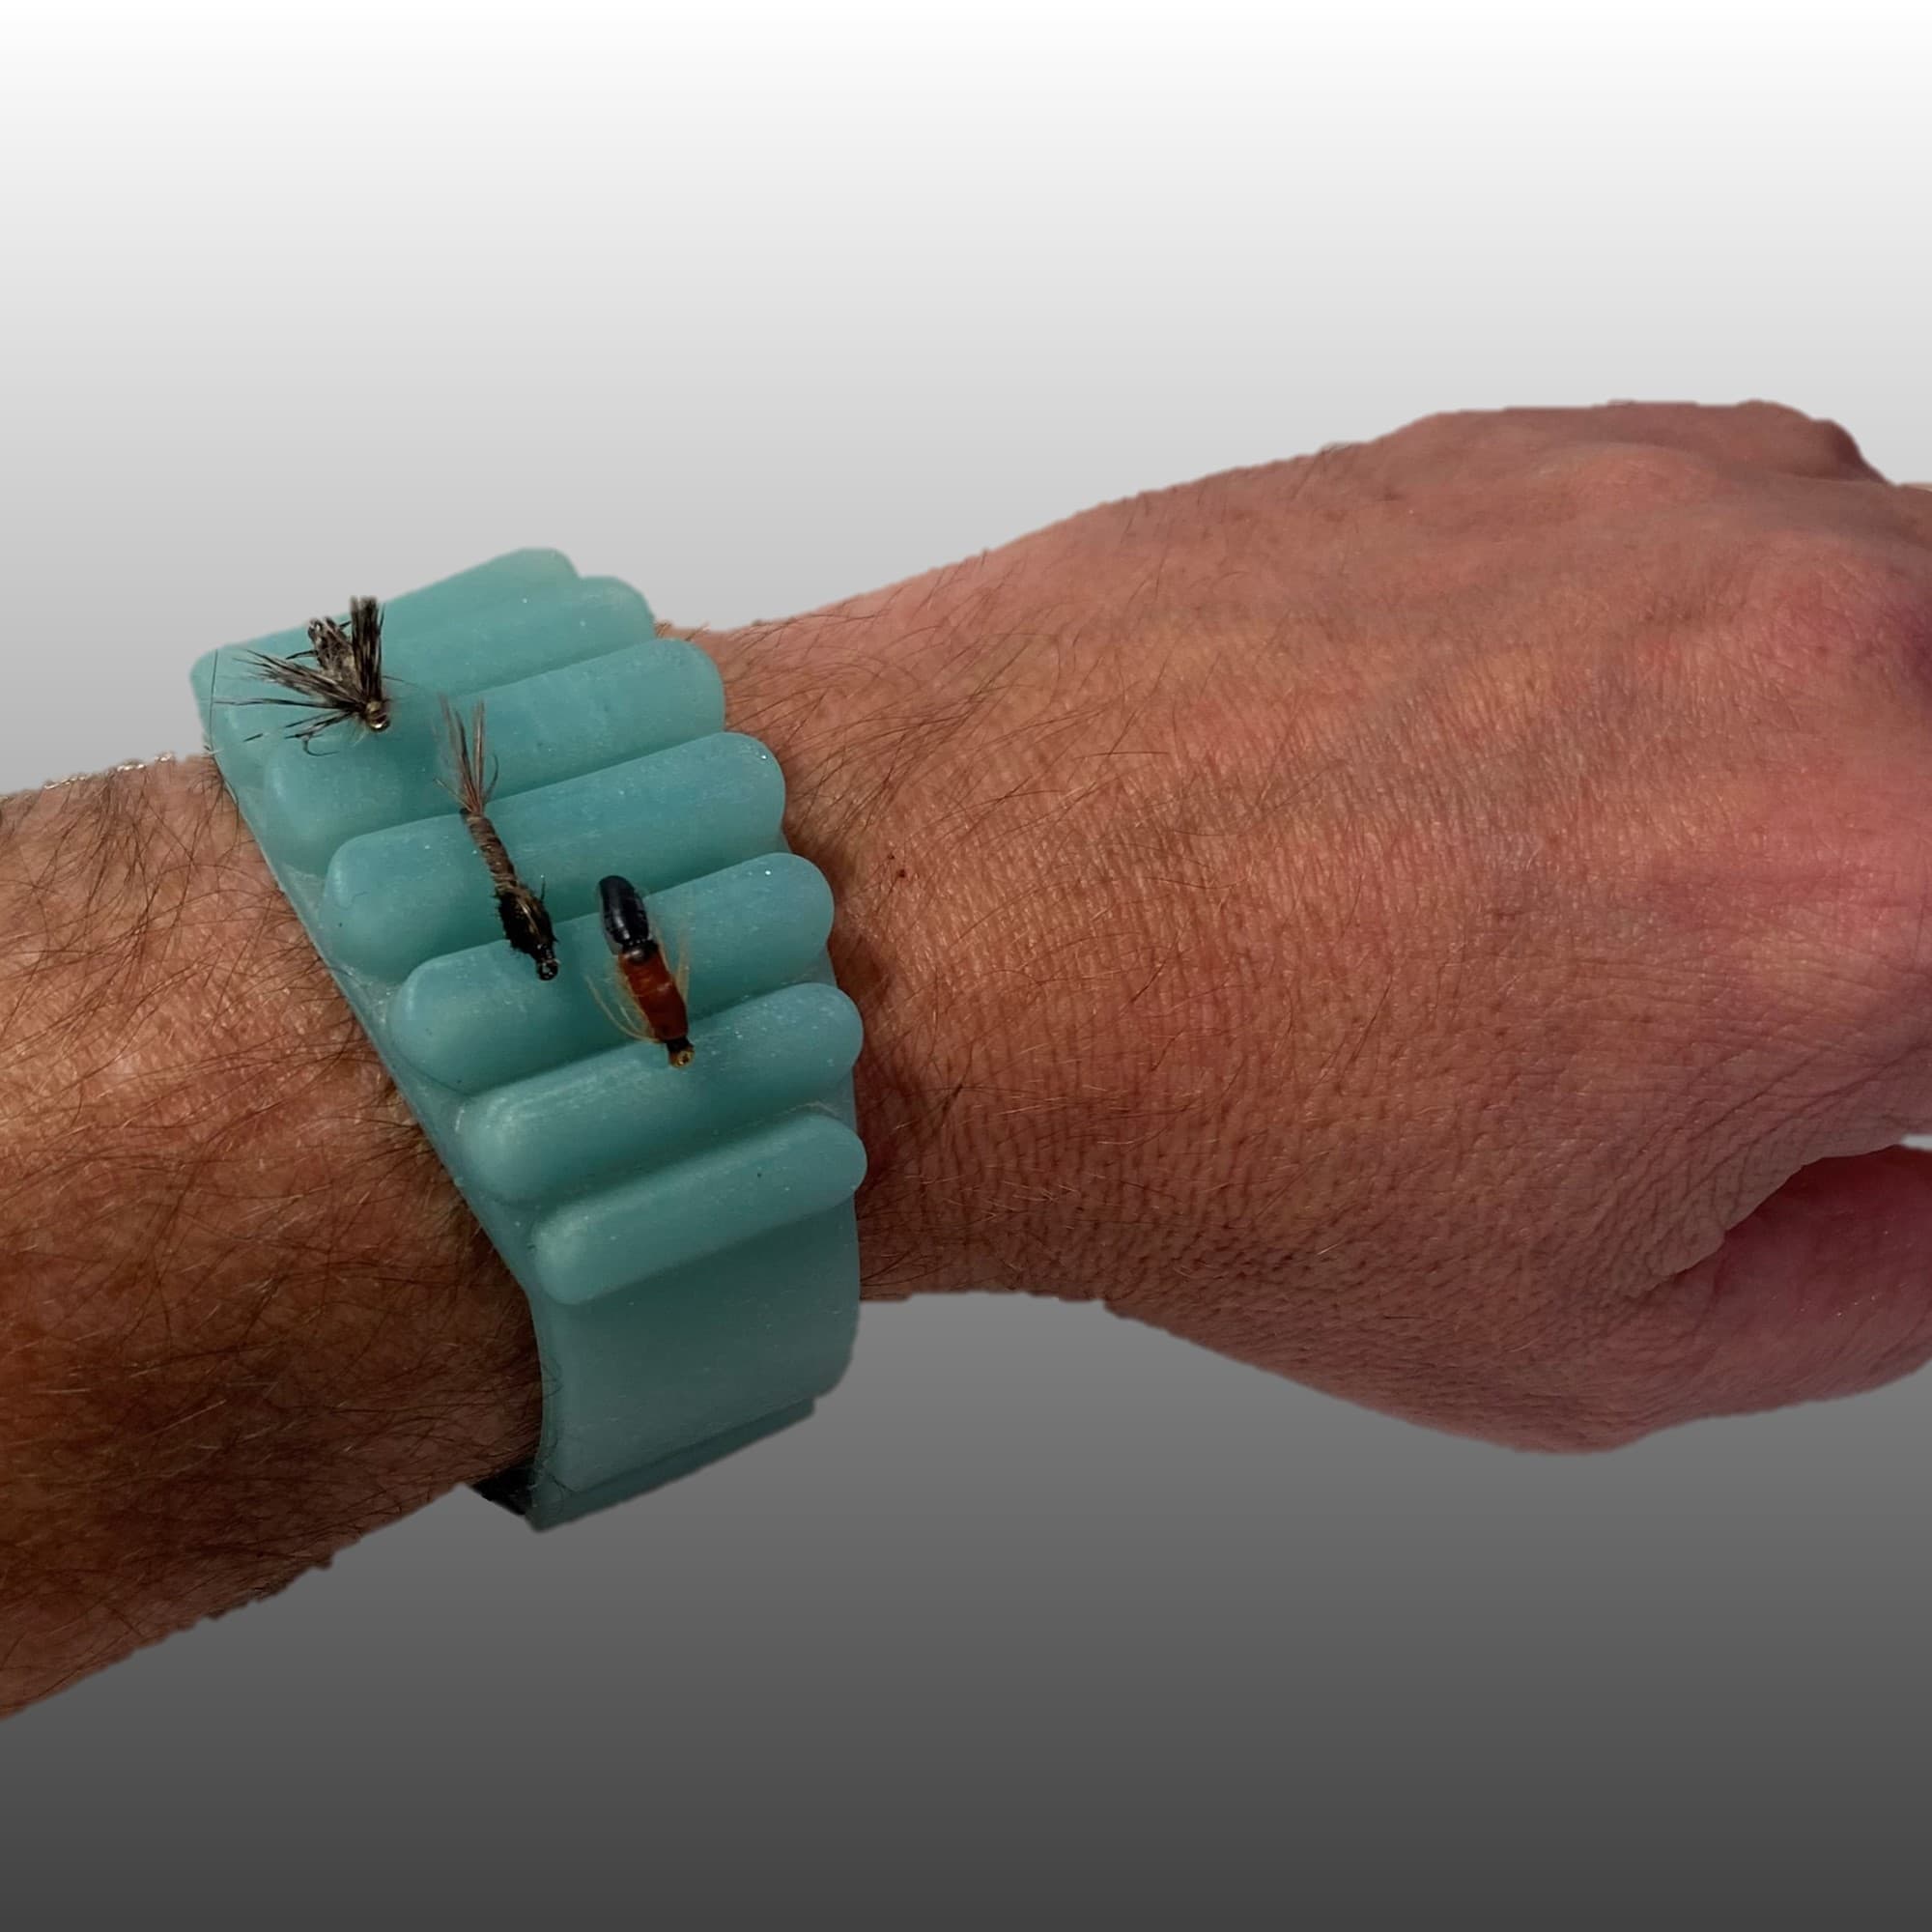 Fly-on Wrist Band - Unique Fly Fishing Accessory Holds Extra Flies